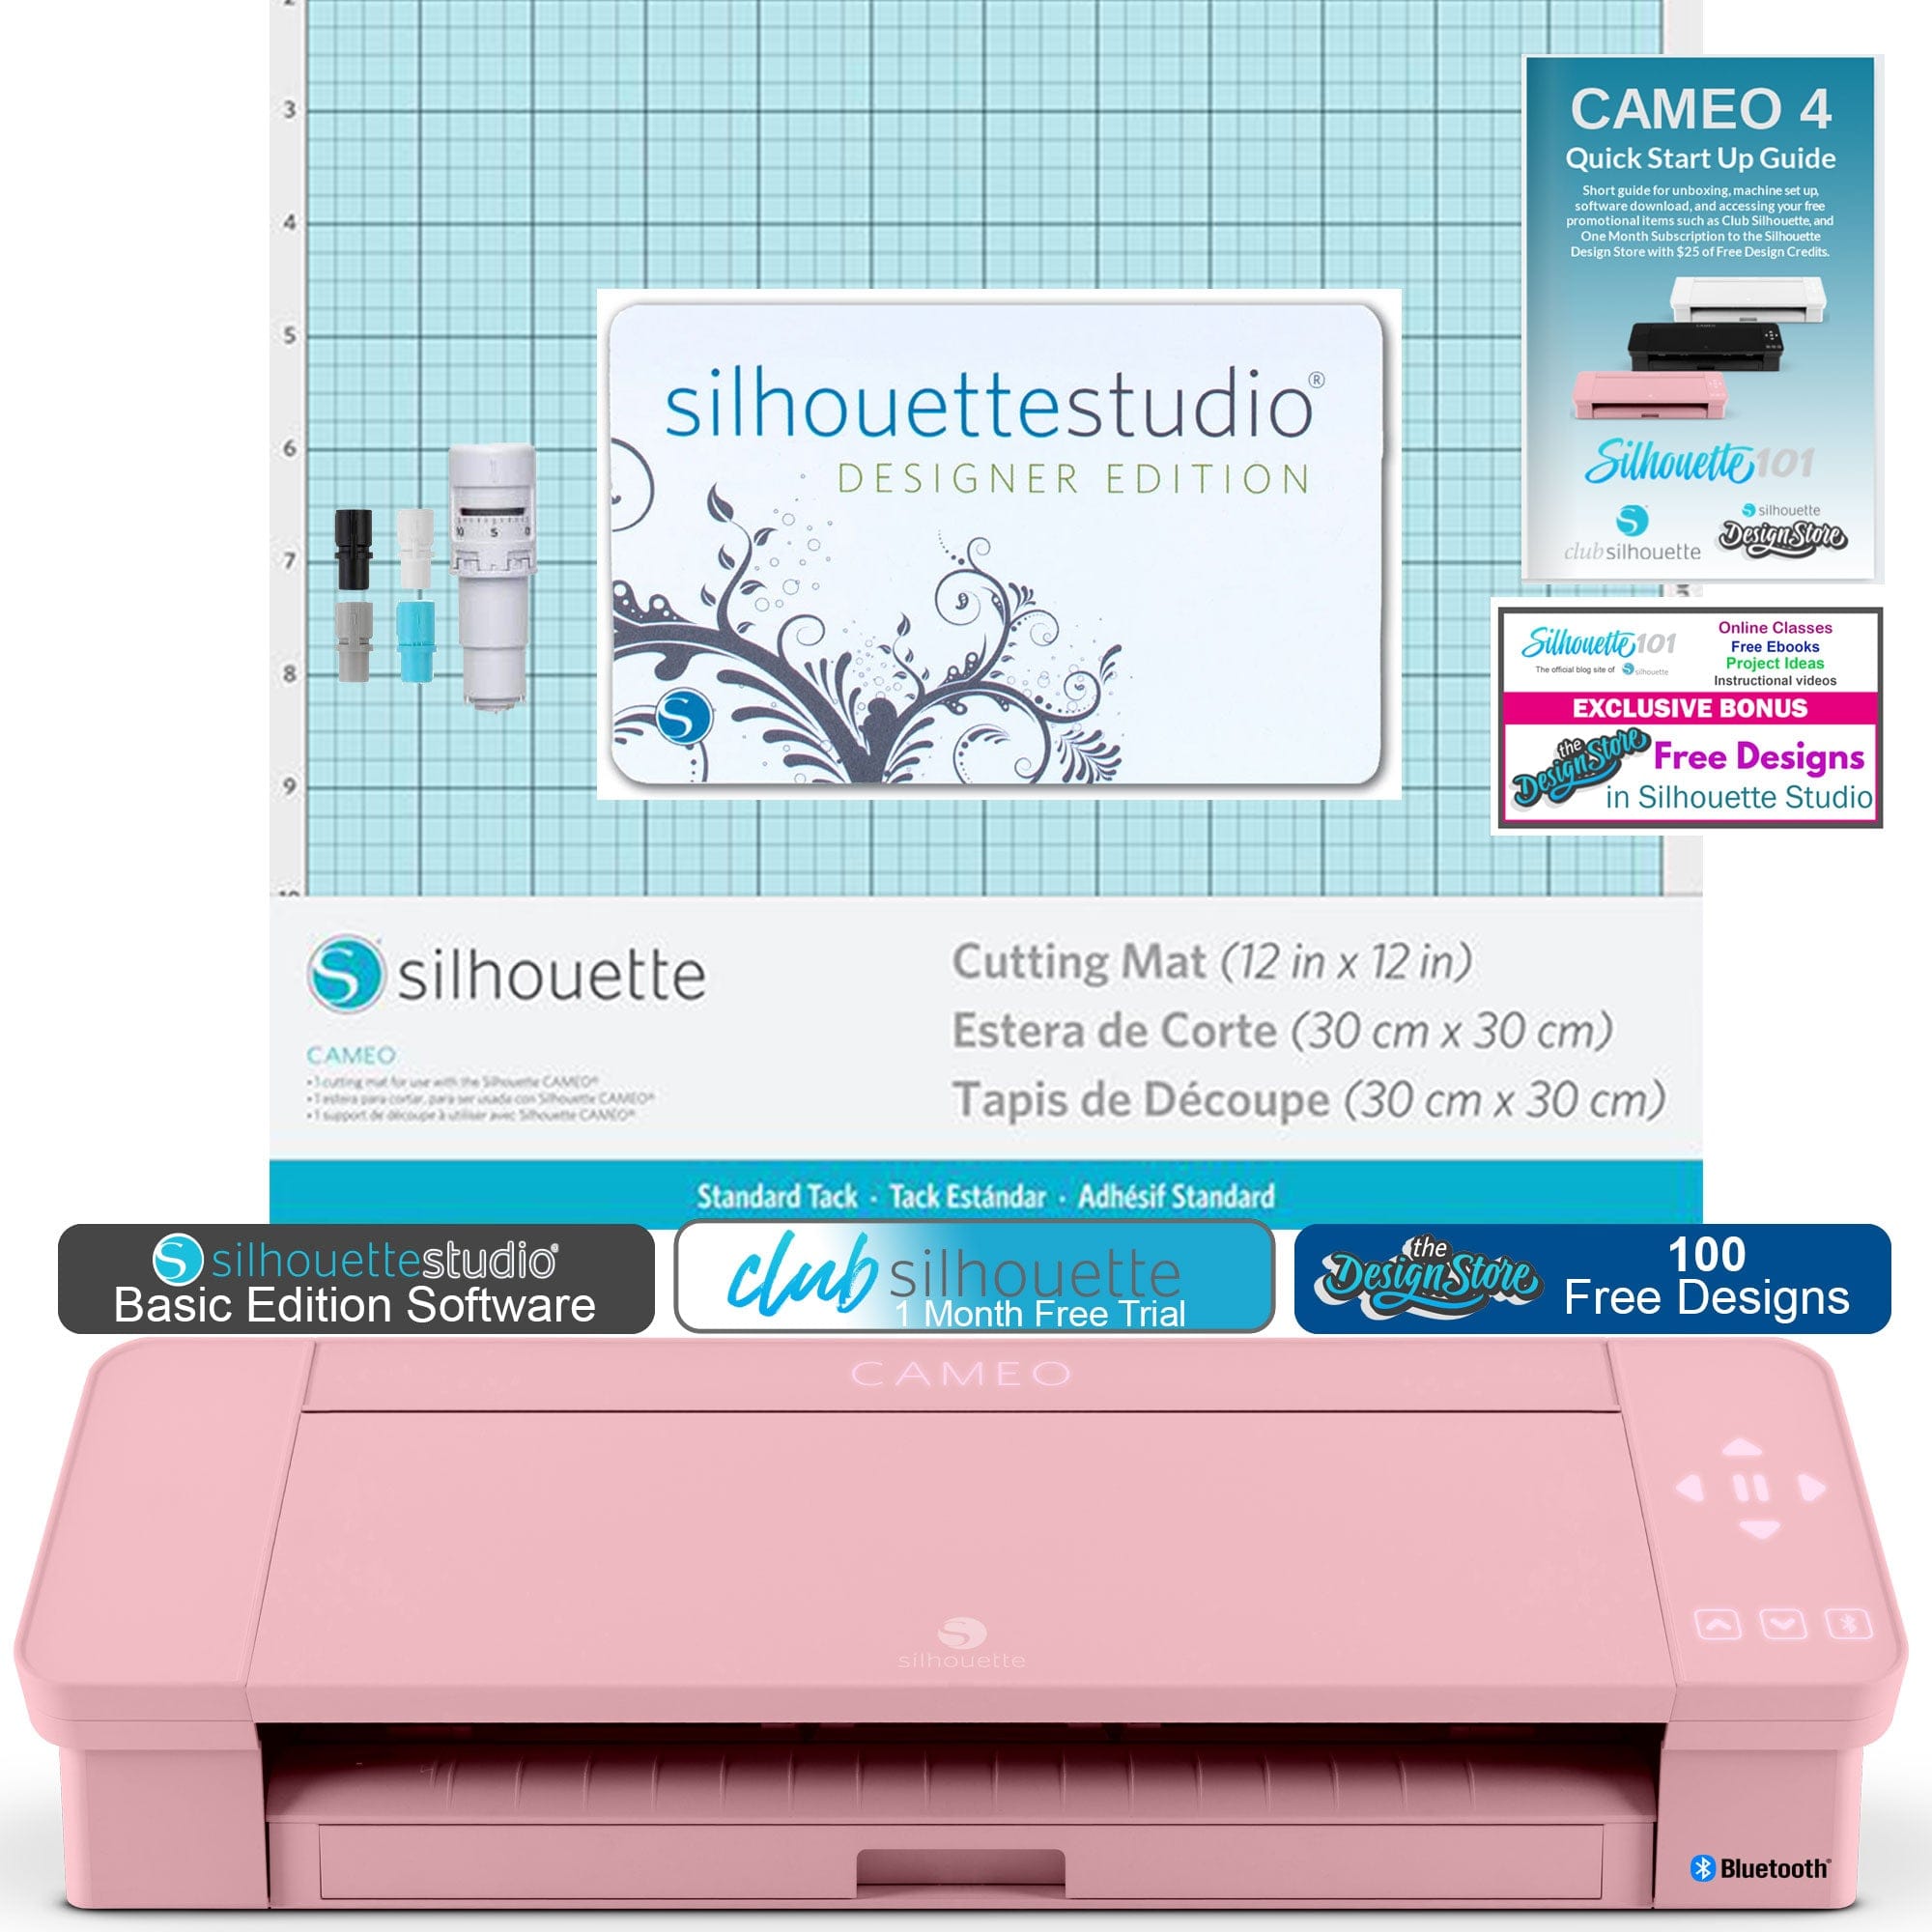 260 Silhouette CAMEO Bundles and Accessories ideas